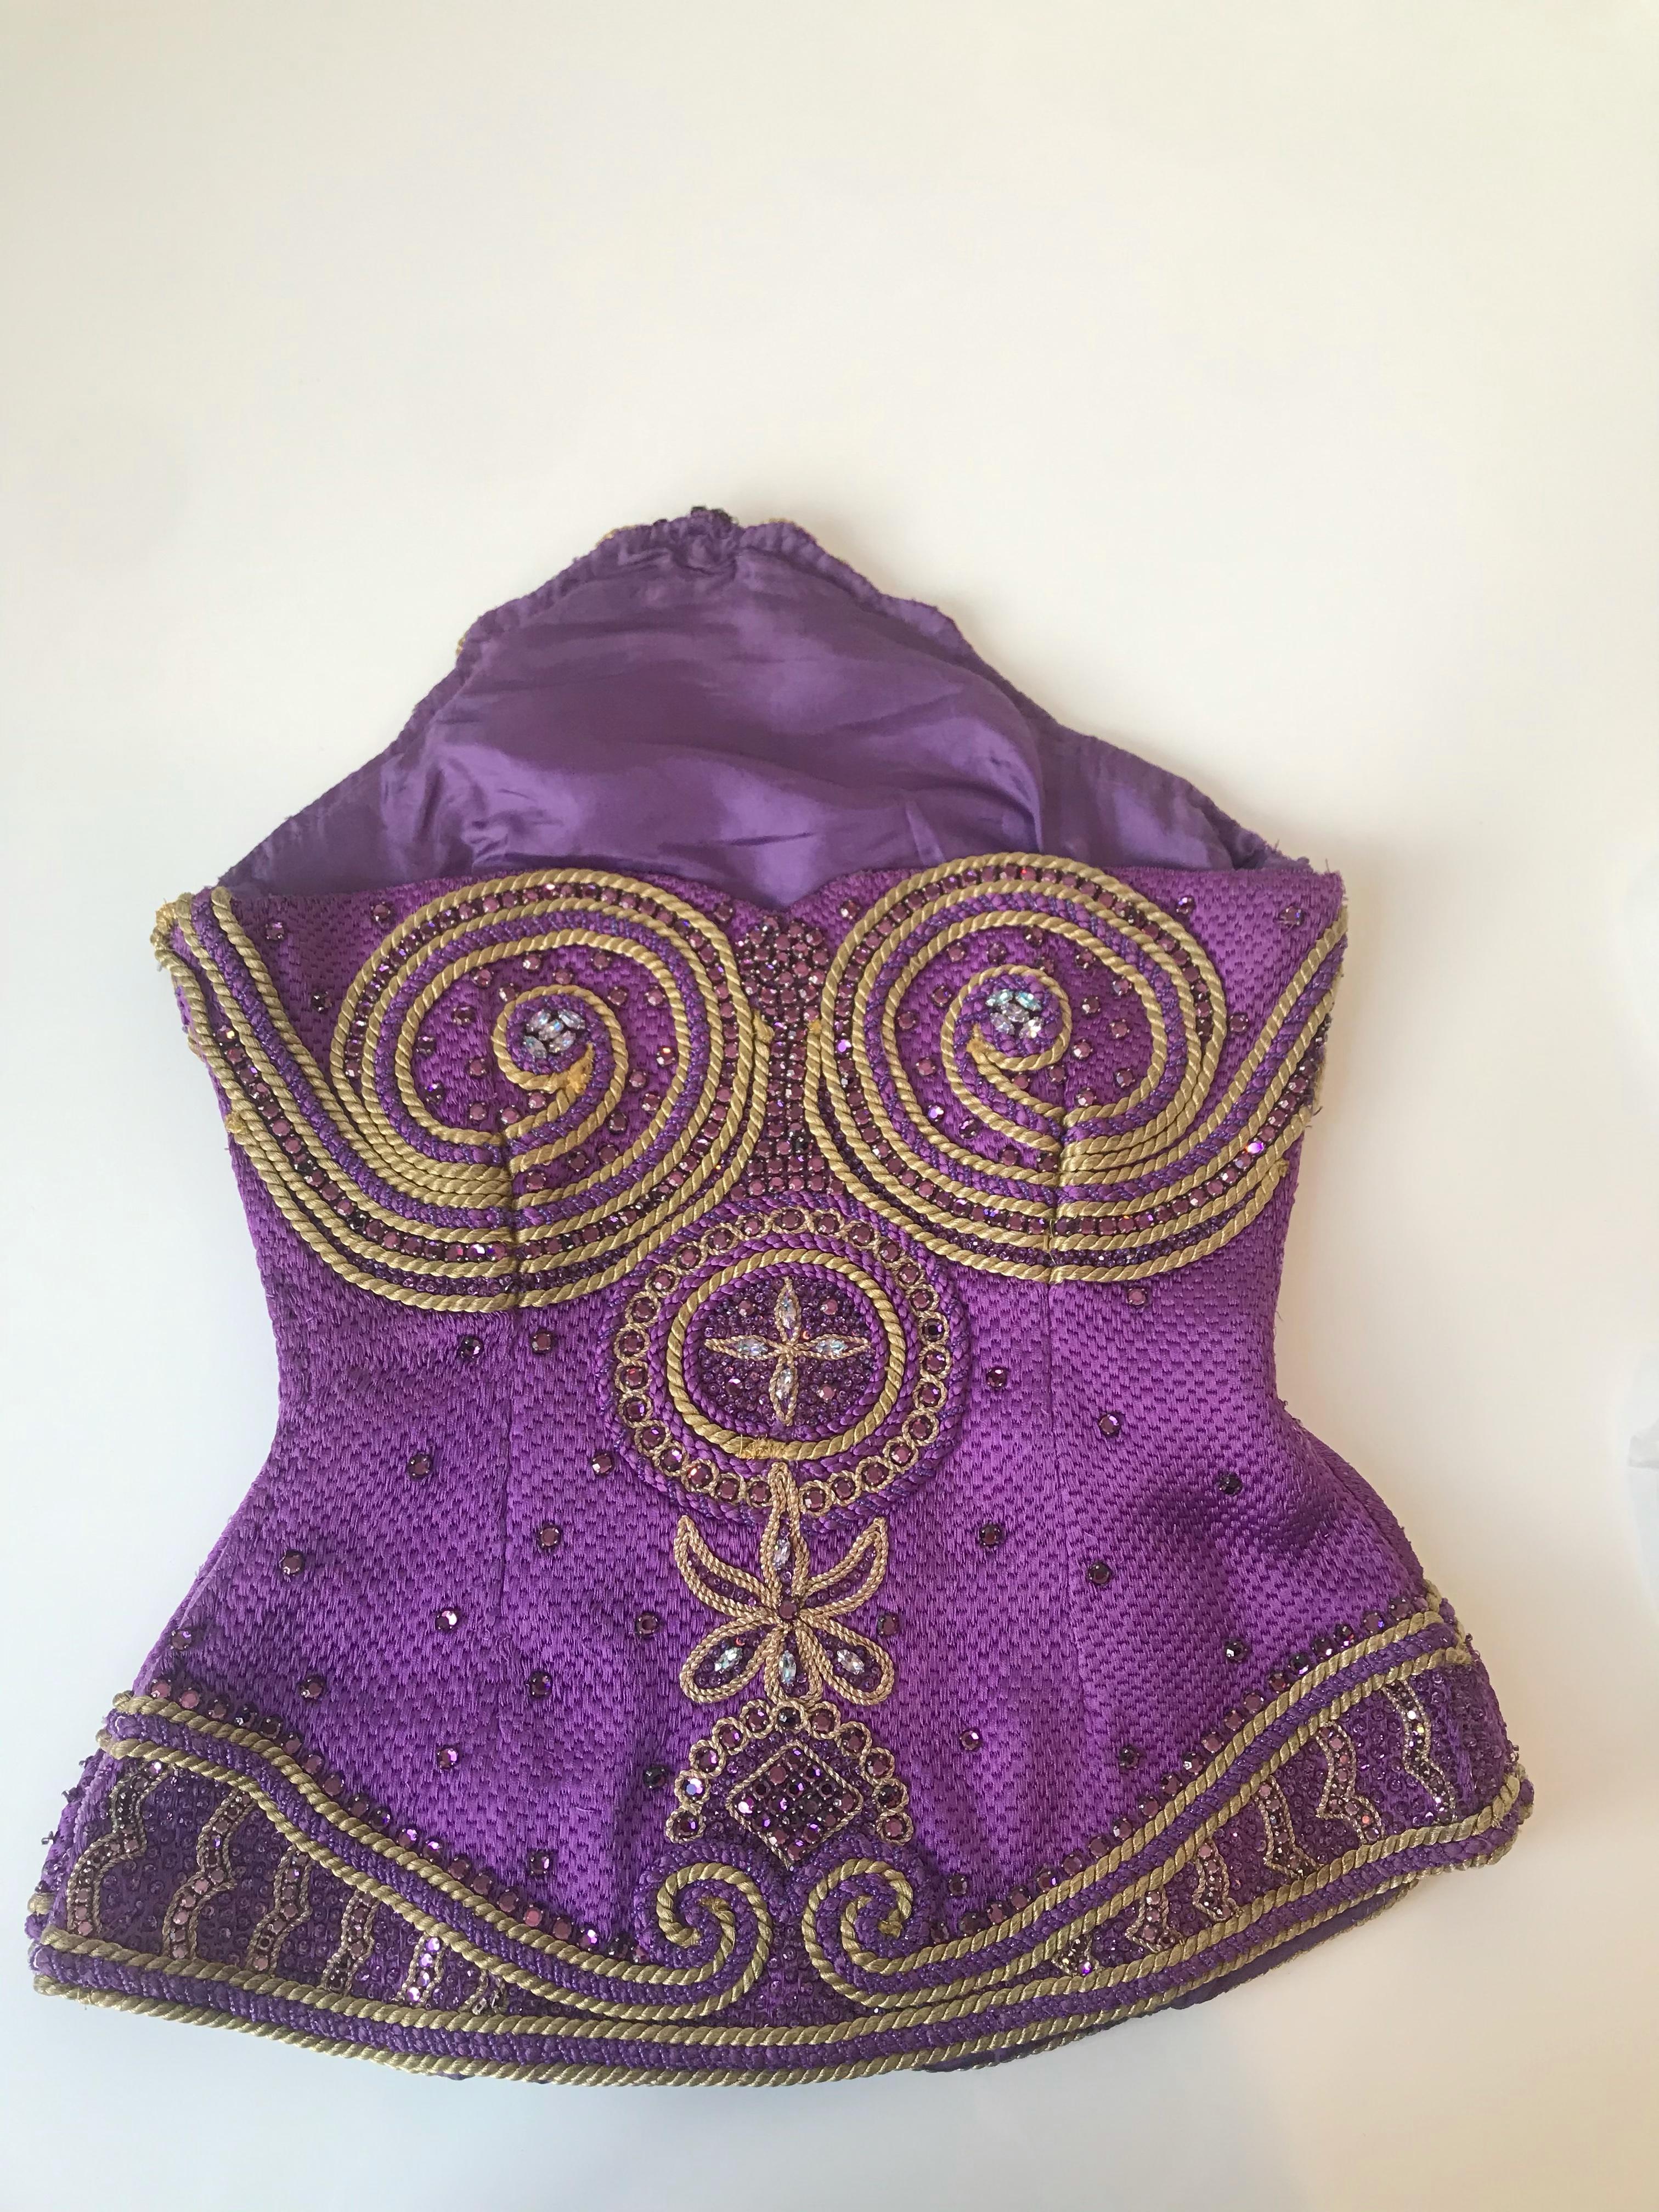 Gianni Versace Couture Purple & Gold Embellished & Embroidered Bustier/Corset For Sale 9